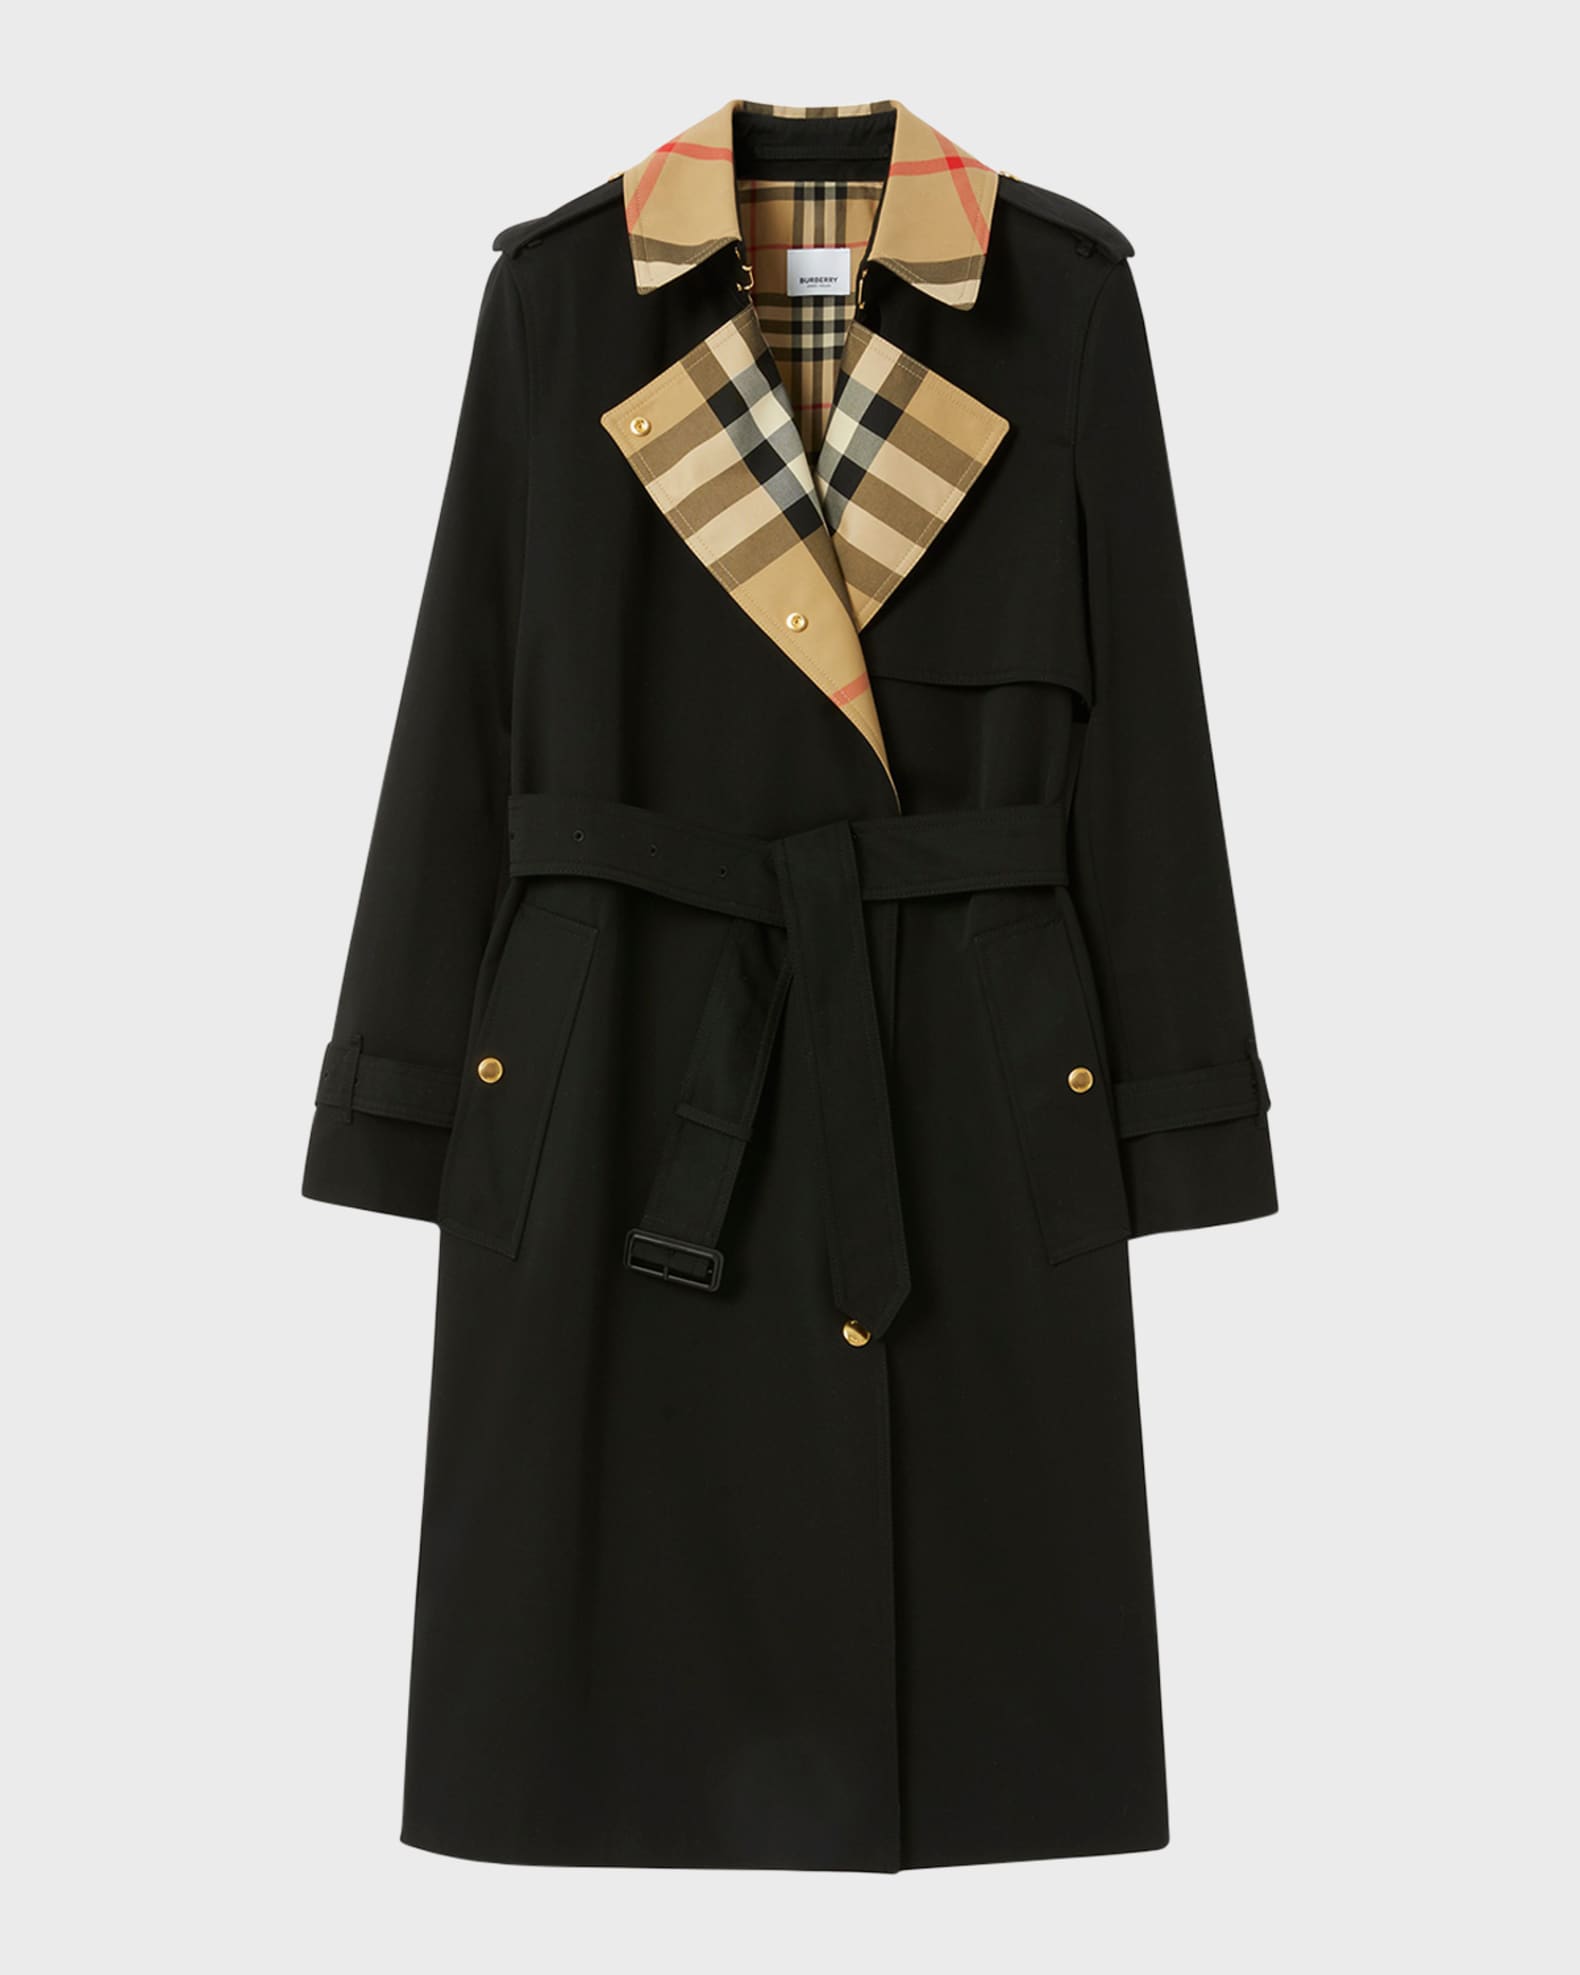 Burberry Sandridge Check Belted Double-Breasted Trench Coat | Neiman Marcus